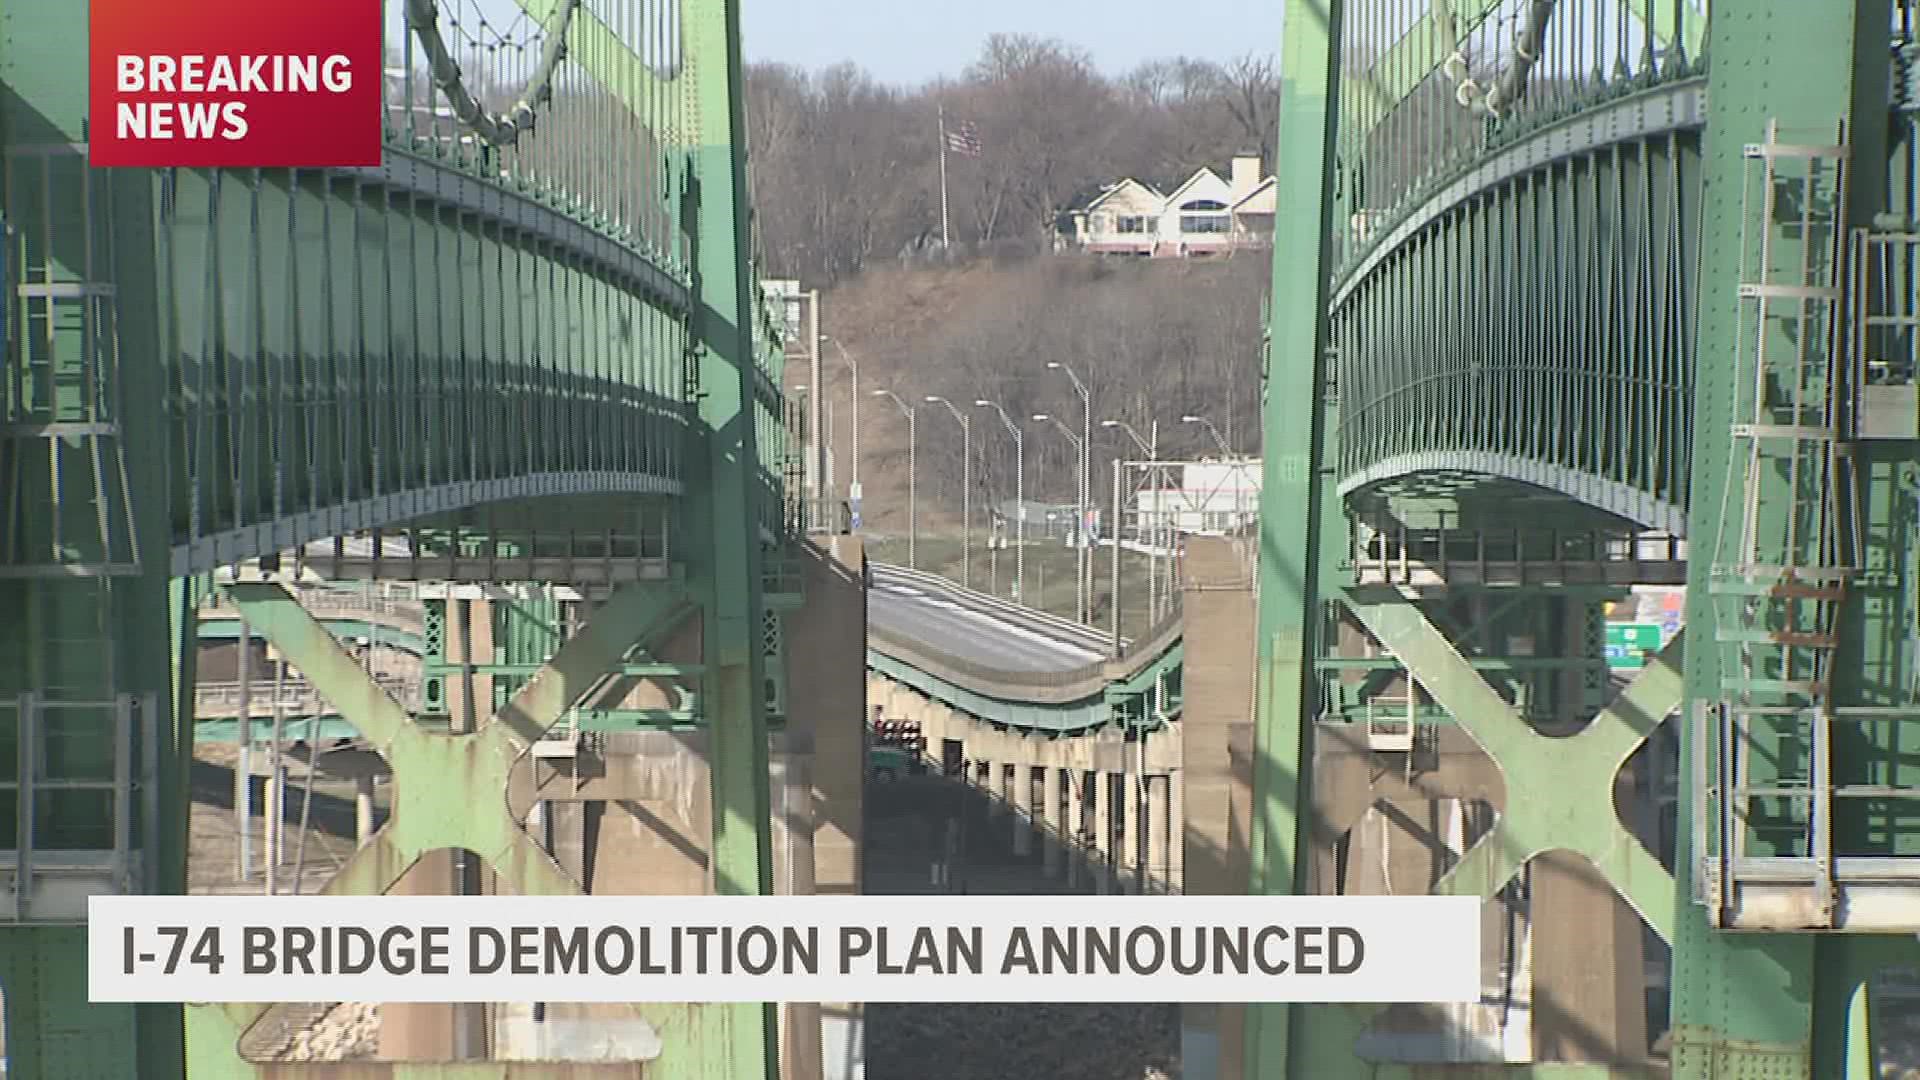 The old I-74 suspension bridge is slated to be completely removed by mid-2024.